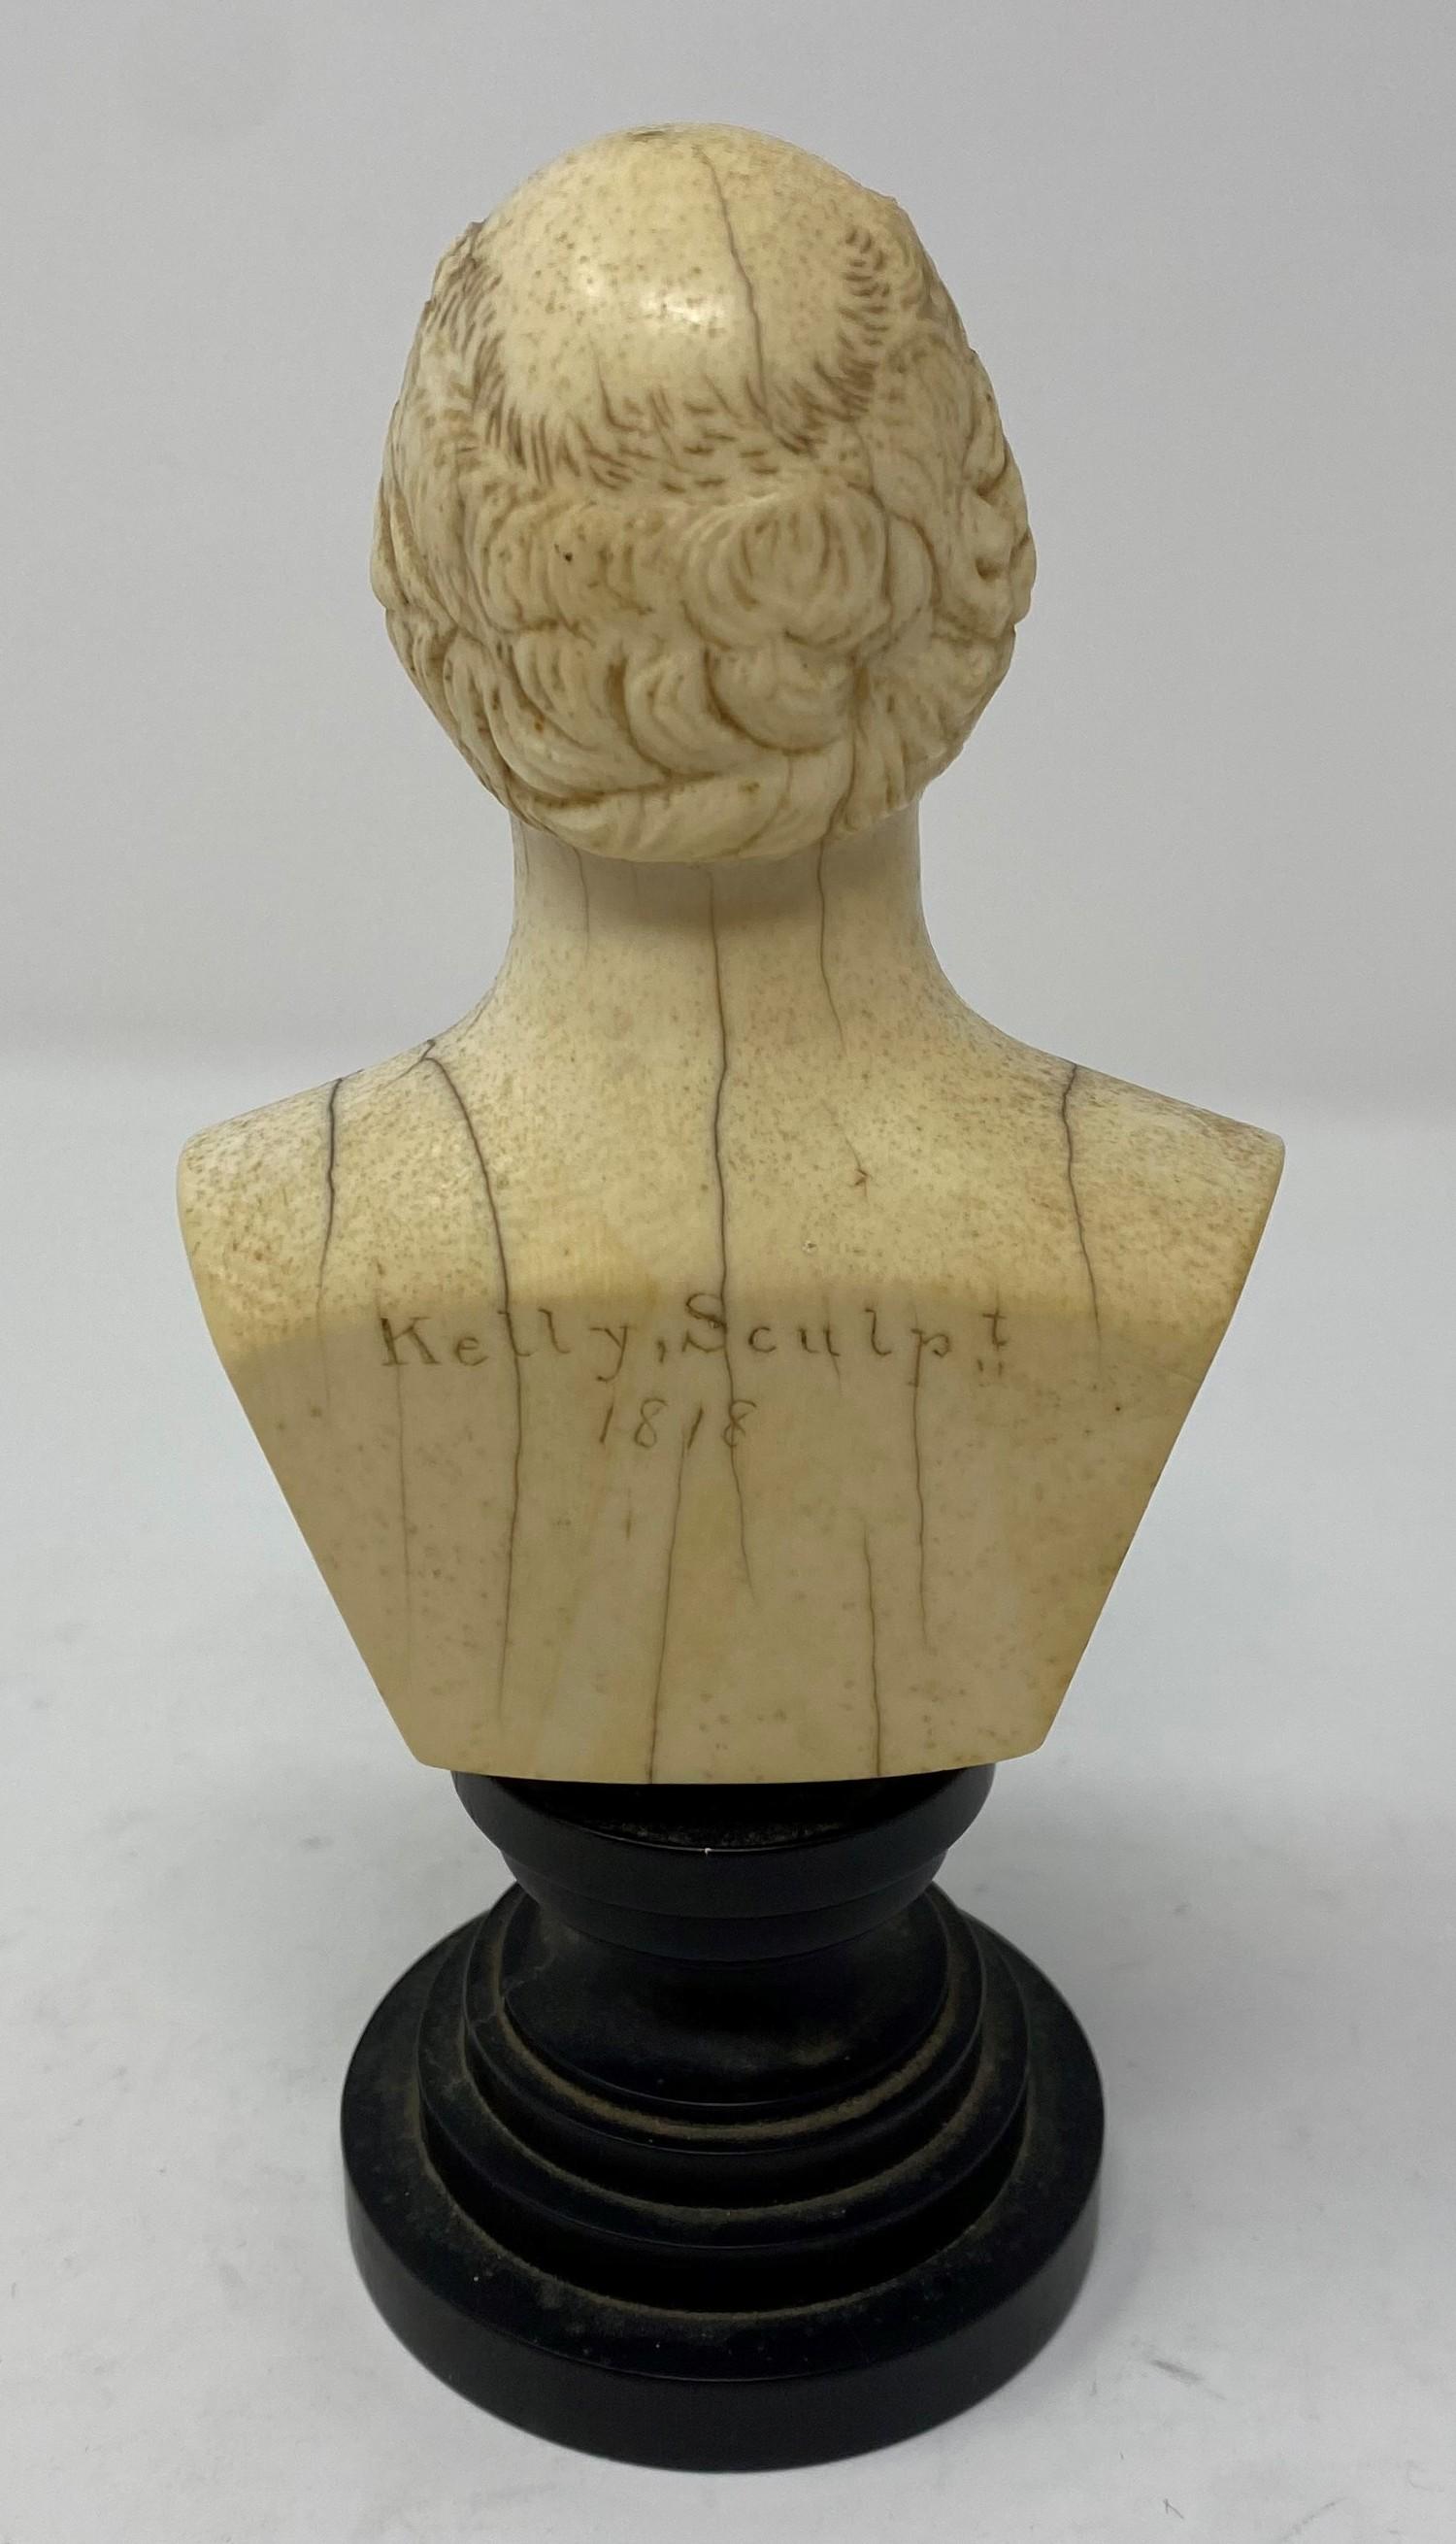 An early 19th century English carved ivory bust, of a gentleman, inscribed Kelly, Sculpt 1818, 10. - Image 2 of 2